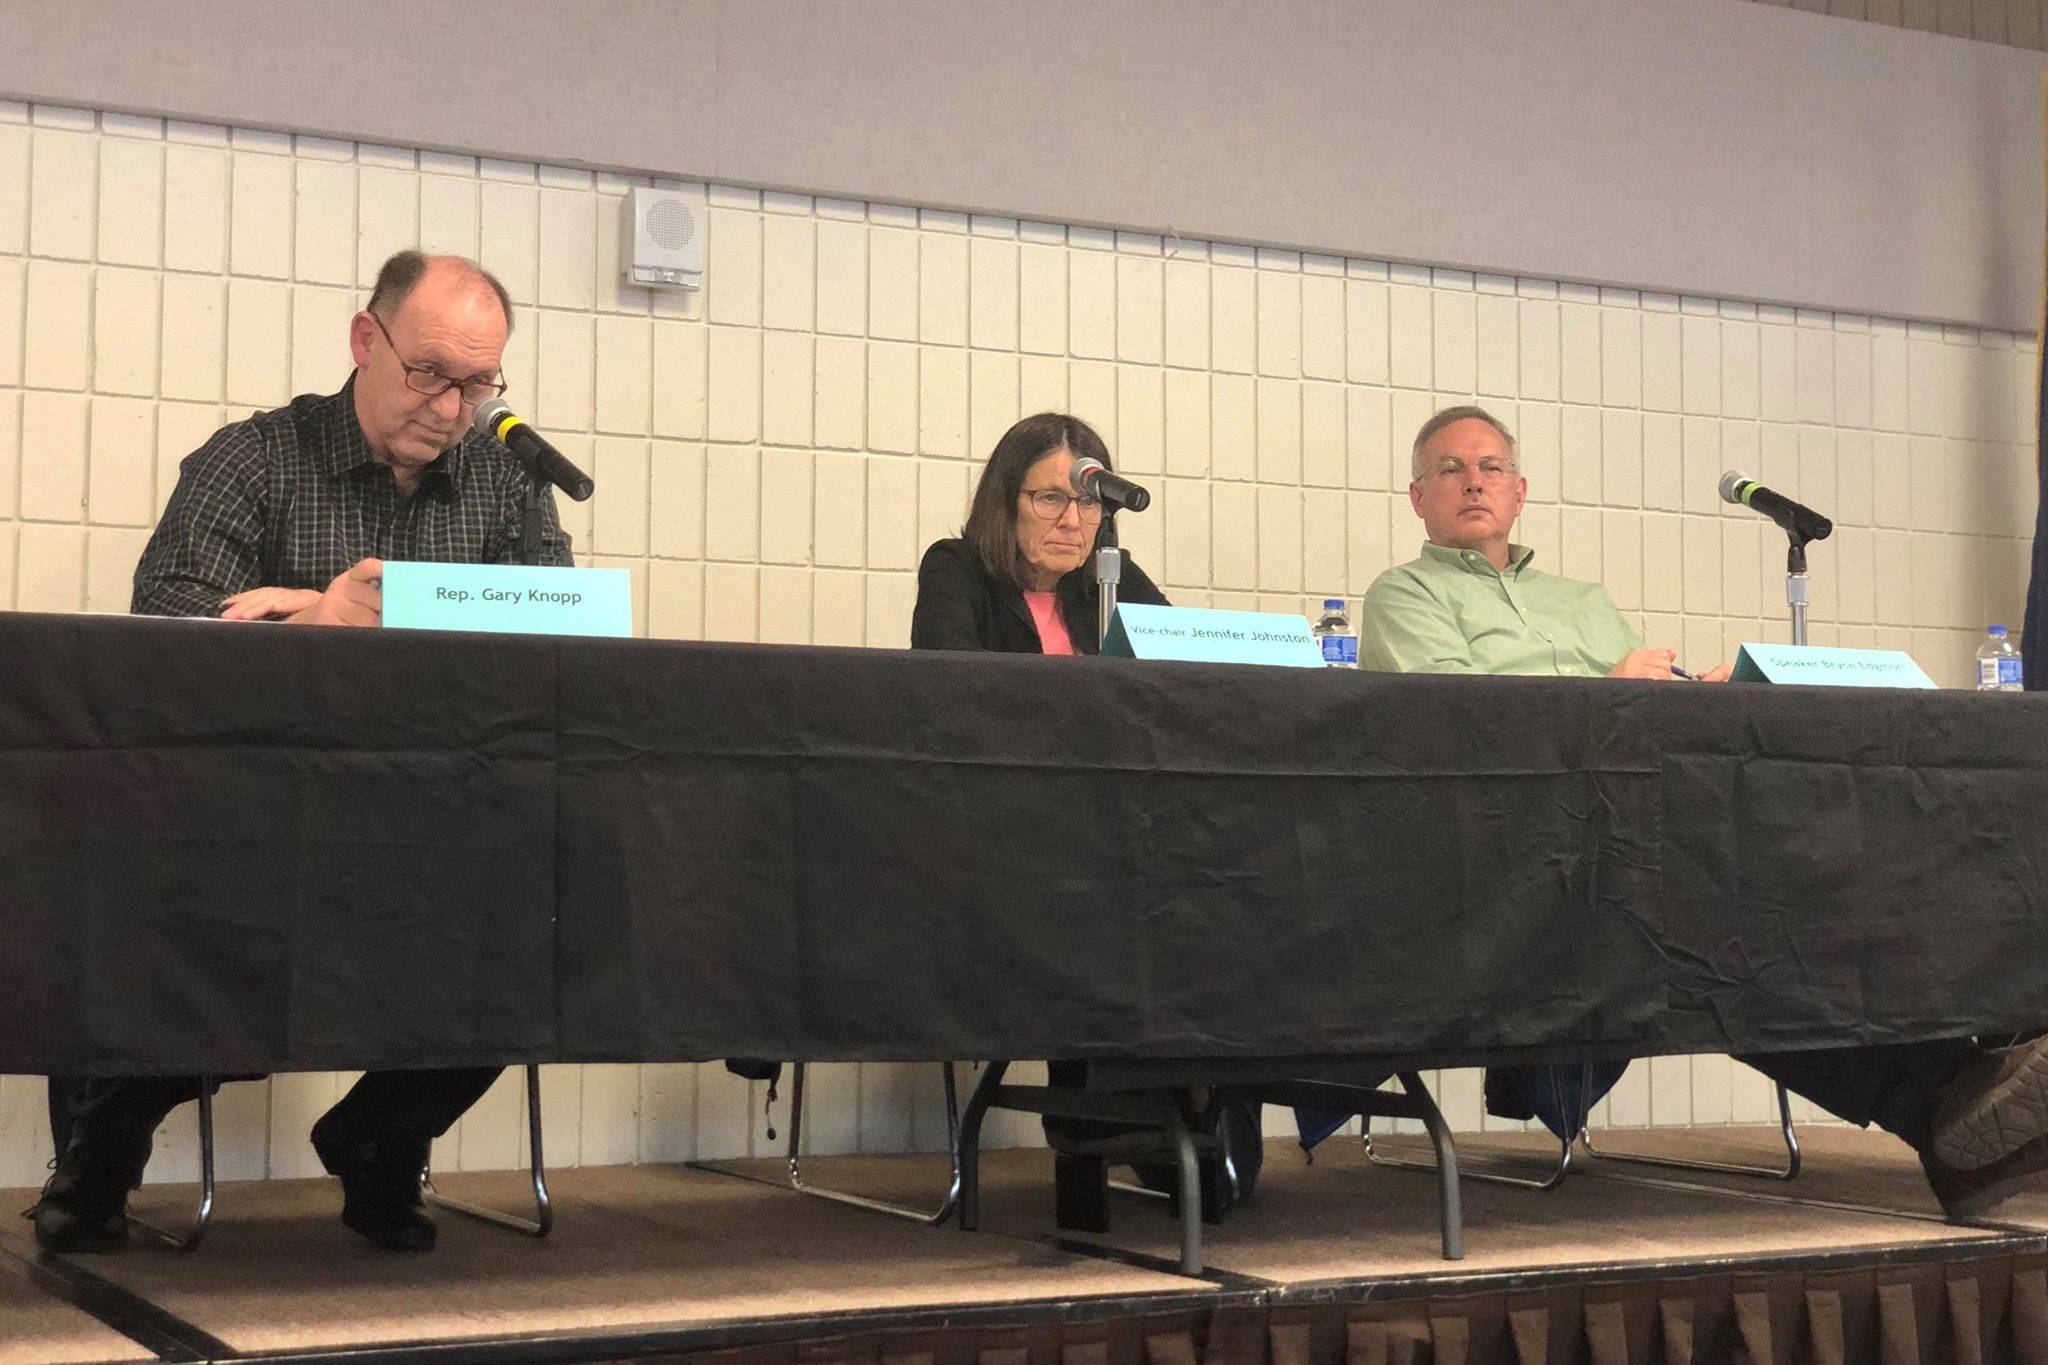 Rep. Gary Knopp (R-Kenai/Soldotna), House Speaker Bryce Edgmon (I-Dillingham) and Vice-Chair of the House Finance Committee Jennifer Johnston (R-Anchorage) listen to public testimony at a local House Finance Committee meeting at the Soldotna Regional Sports Complex on Saturday, March 23, 2019, in Soldotna, Alaska. (Photo by Victoria Petersen/Peninsula Clarion)